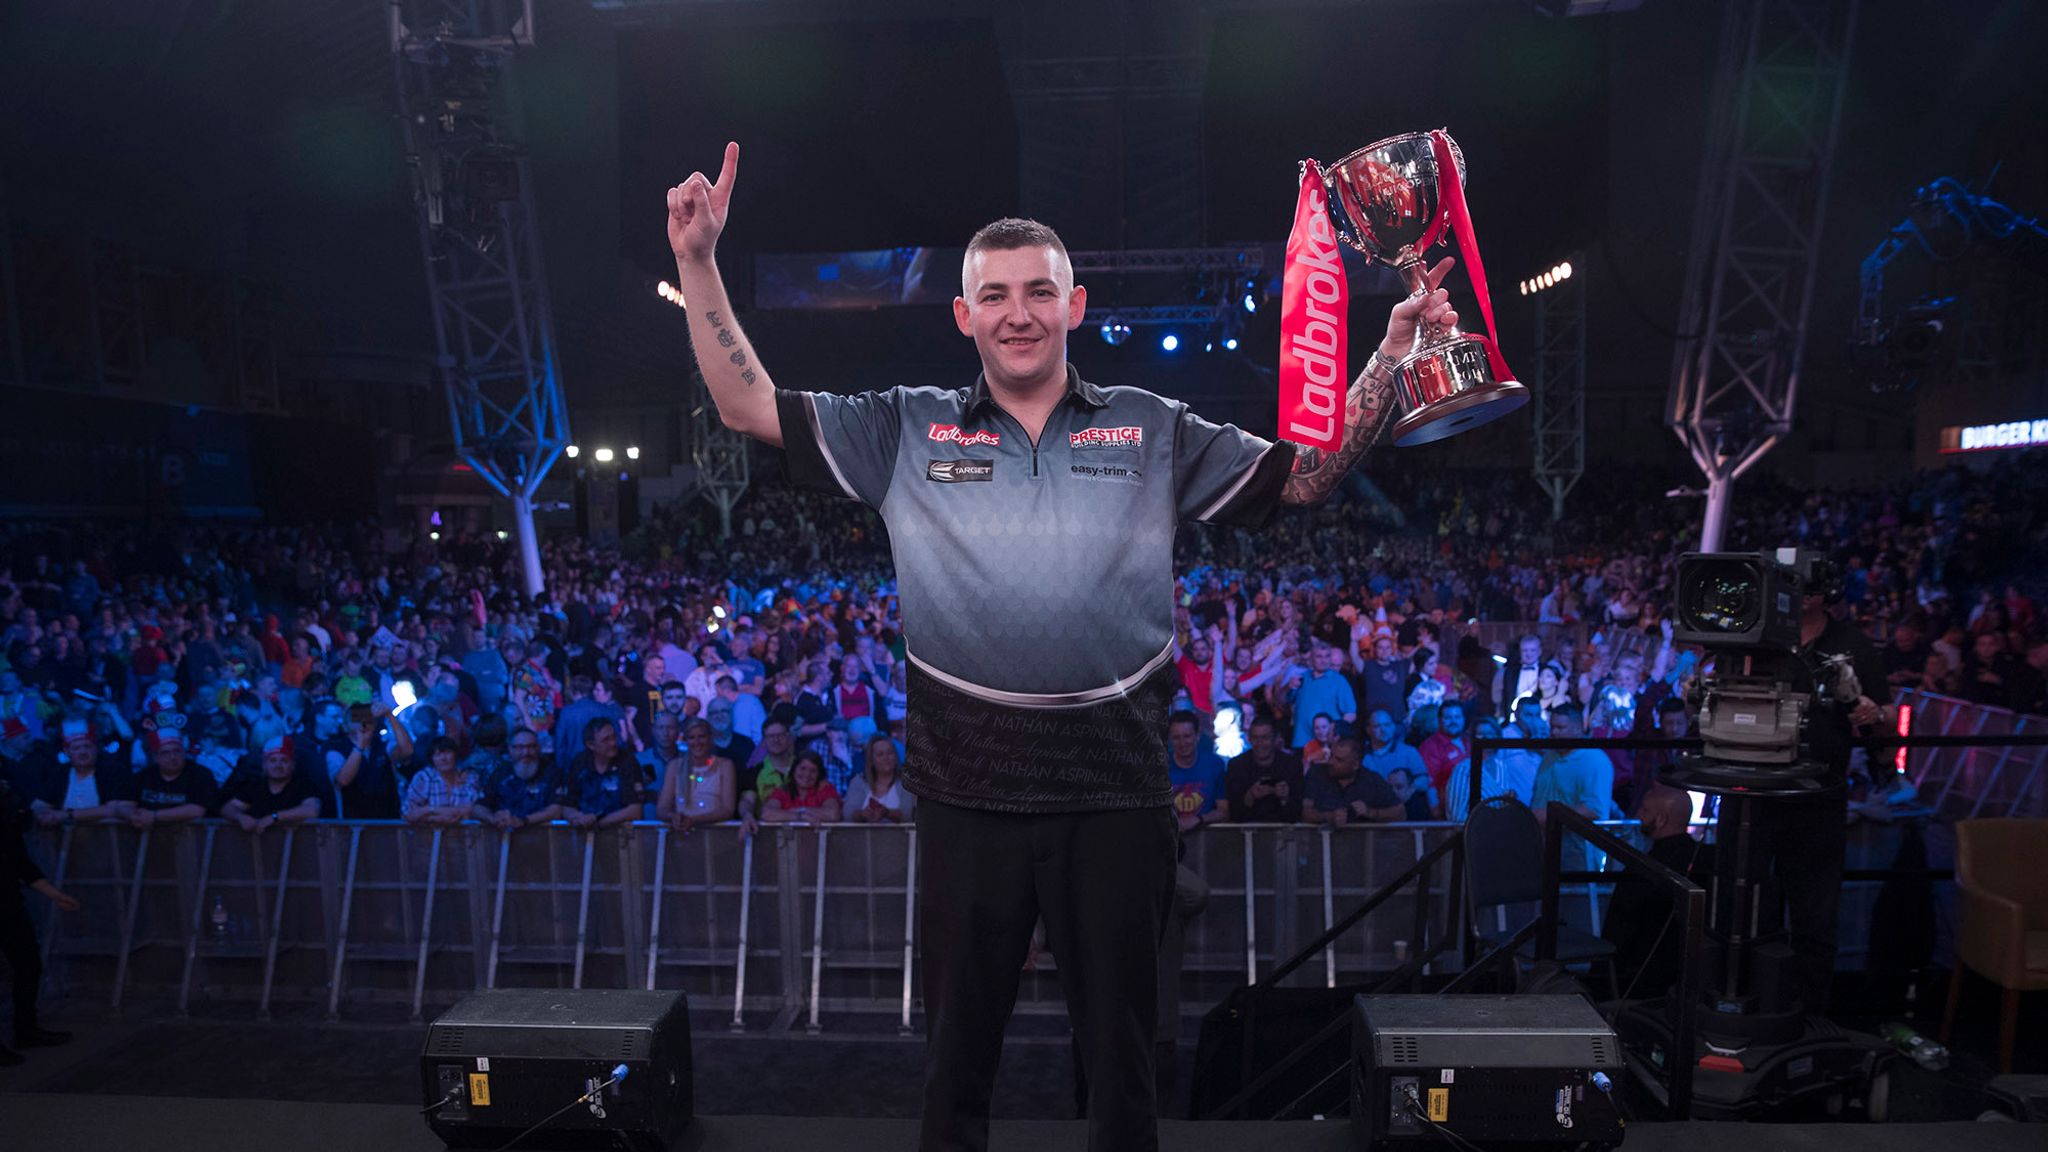 Nathan Aspinall beats Rob Cross to win UK Open and first major title Darts News Sky Sports